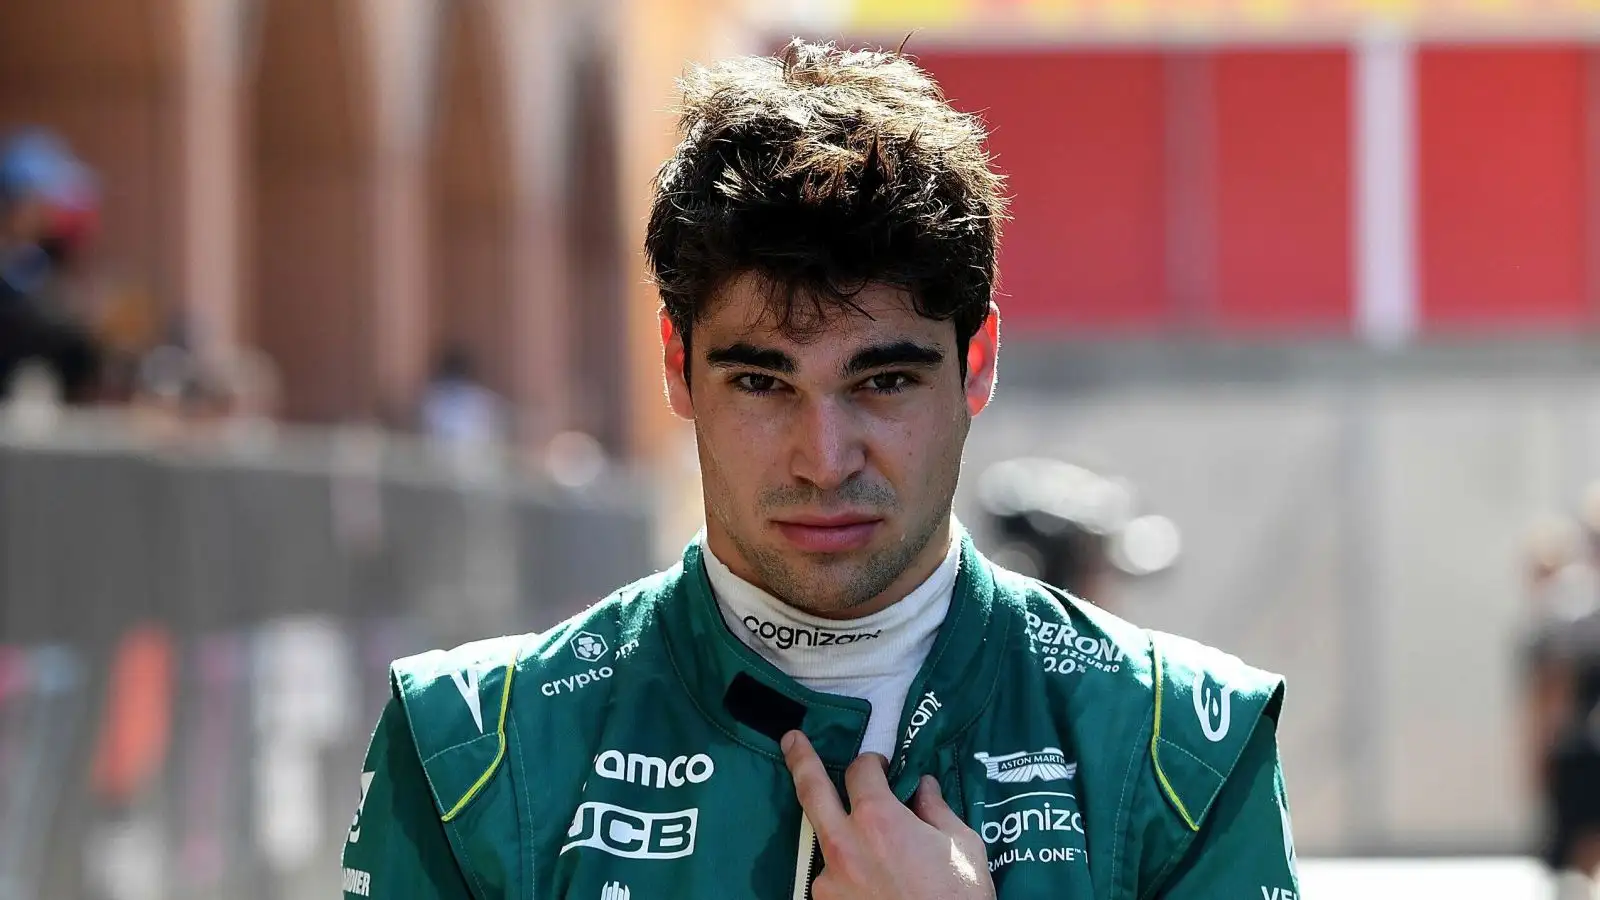 Aston Martin driver Lance Stroll looks thrilled as he makes his way through the paddock at the Monaco Grand Prix. Monte Carlo, 2023.